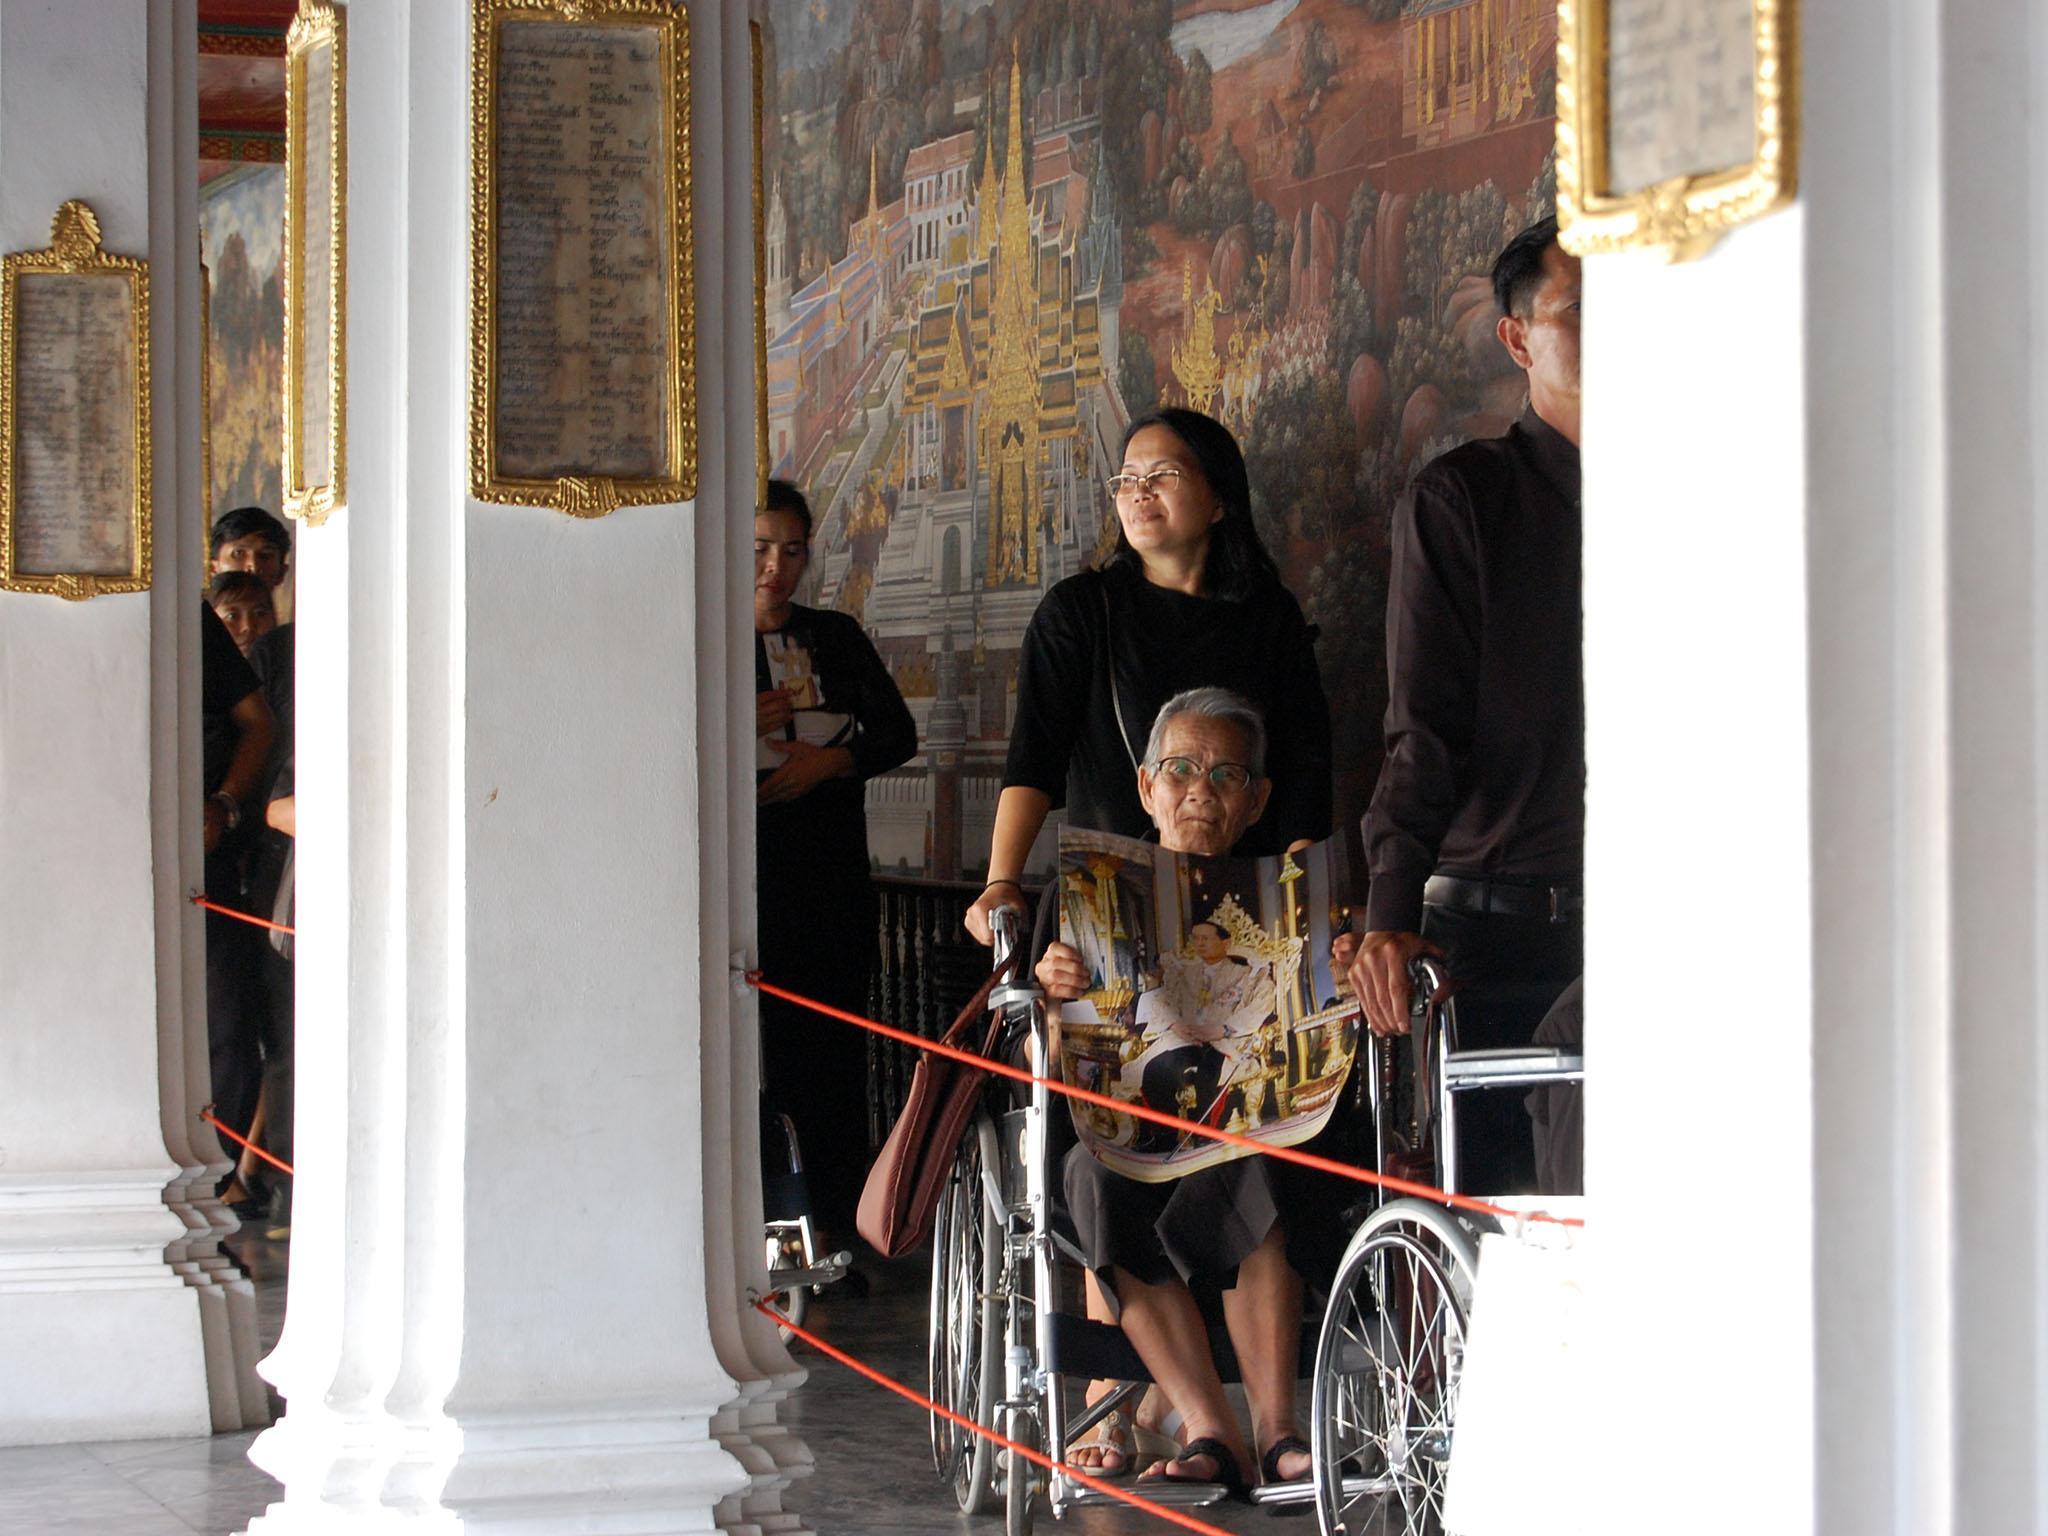 Mourners wait up to 10 hours in the blazing sun outside the Grand Palace to pay their respects to the dead king